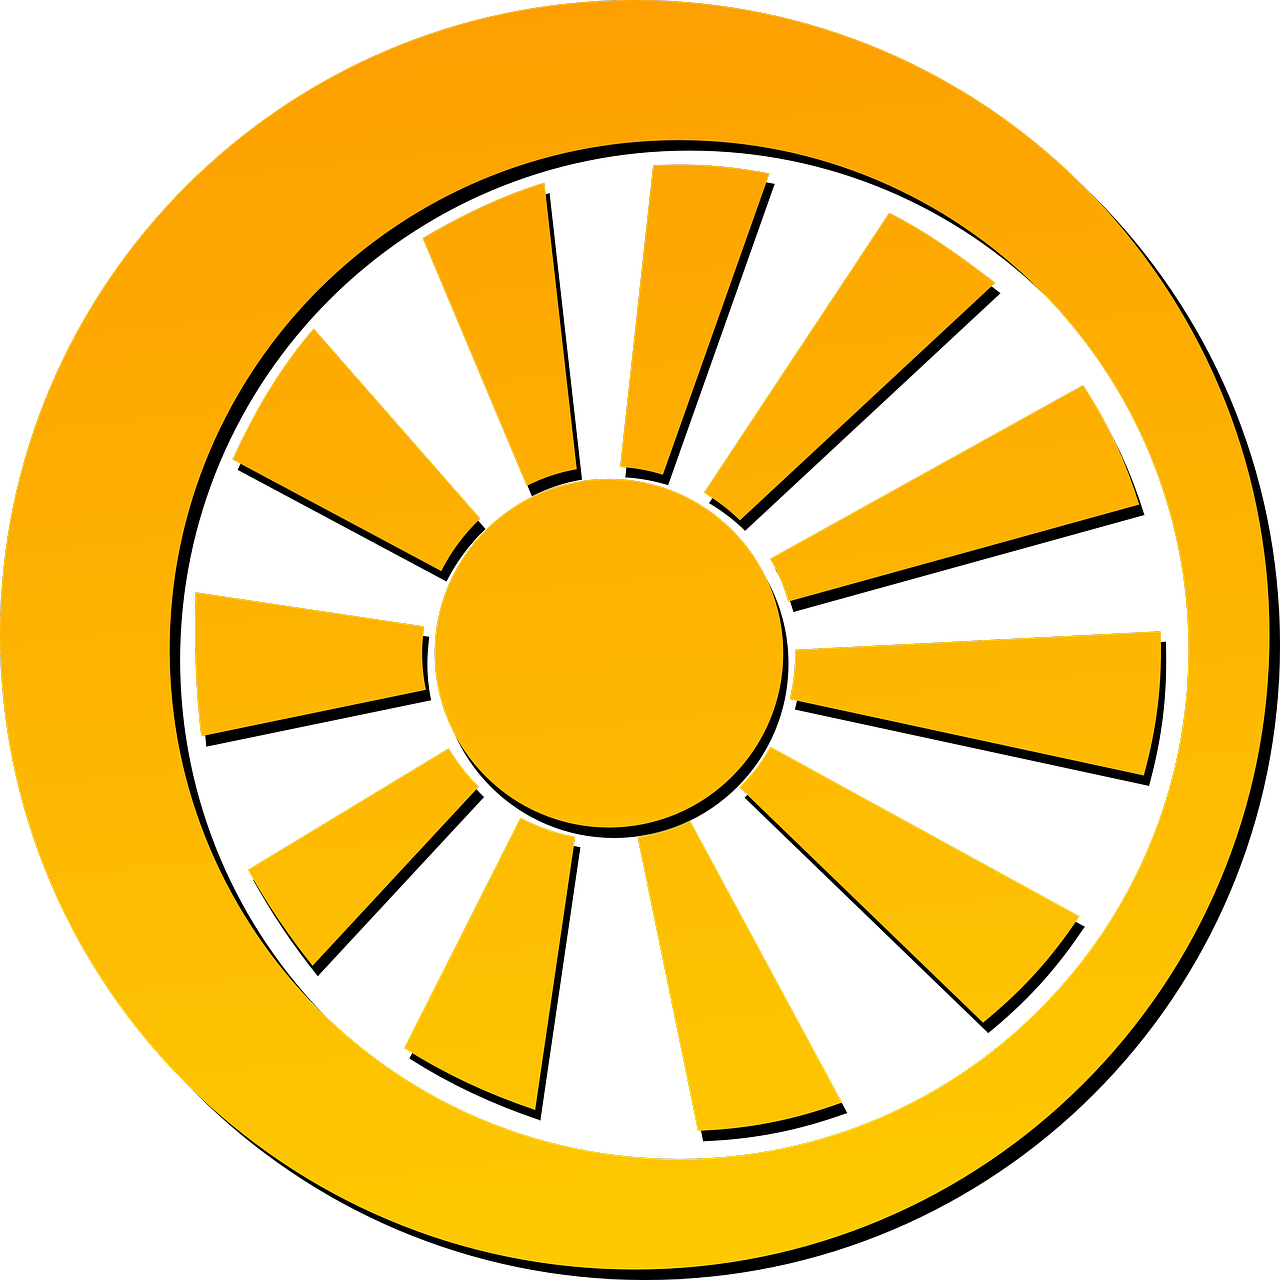 wheel,spoke,sun,symbol,yellow,sketch,hand drawn sketch,free pictures, free photos, free images, royalty free, free illustrations, public domain